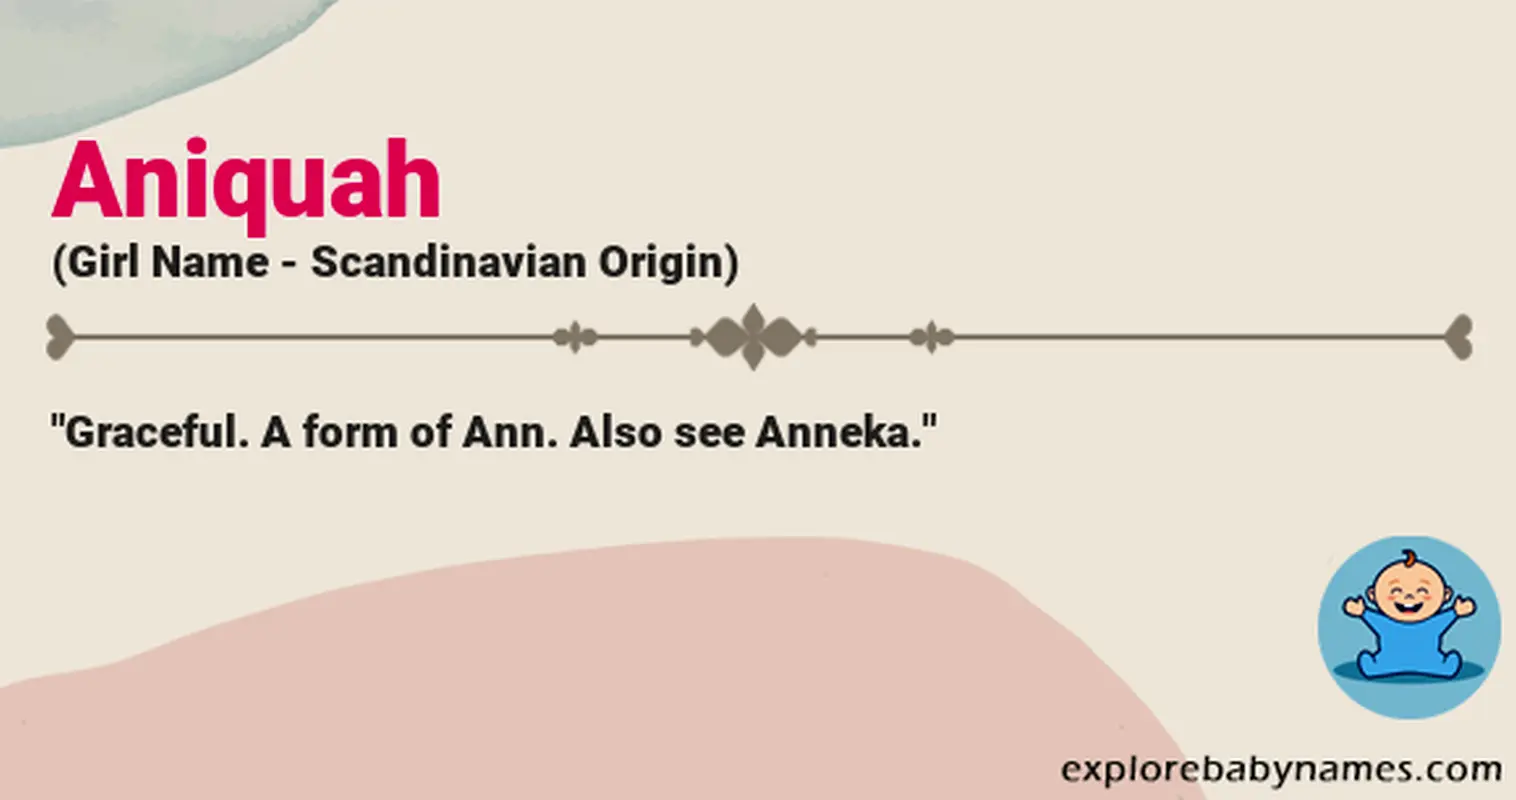 Meaning of Aniquah